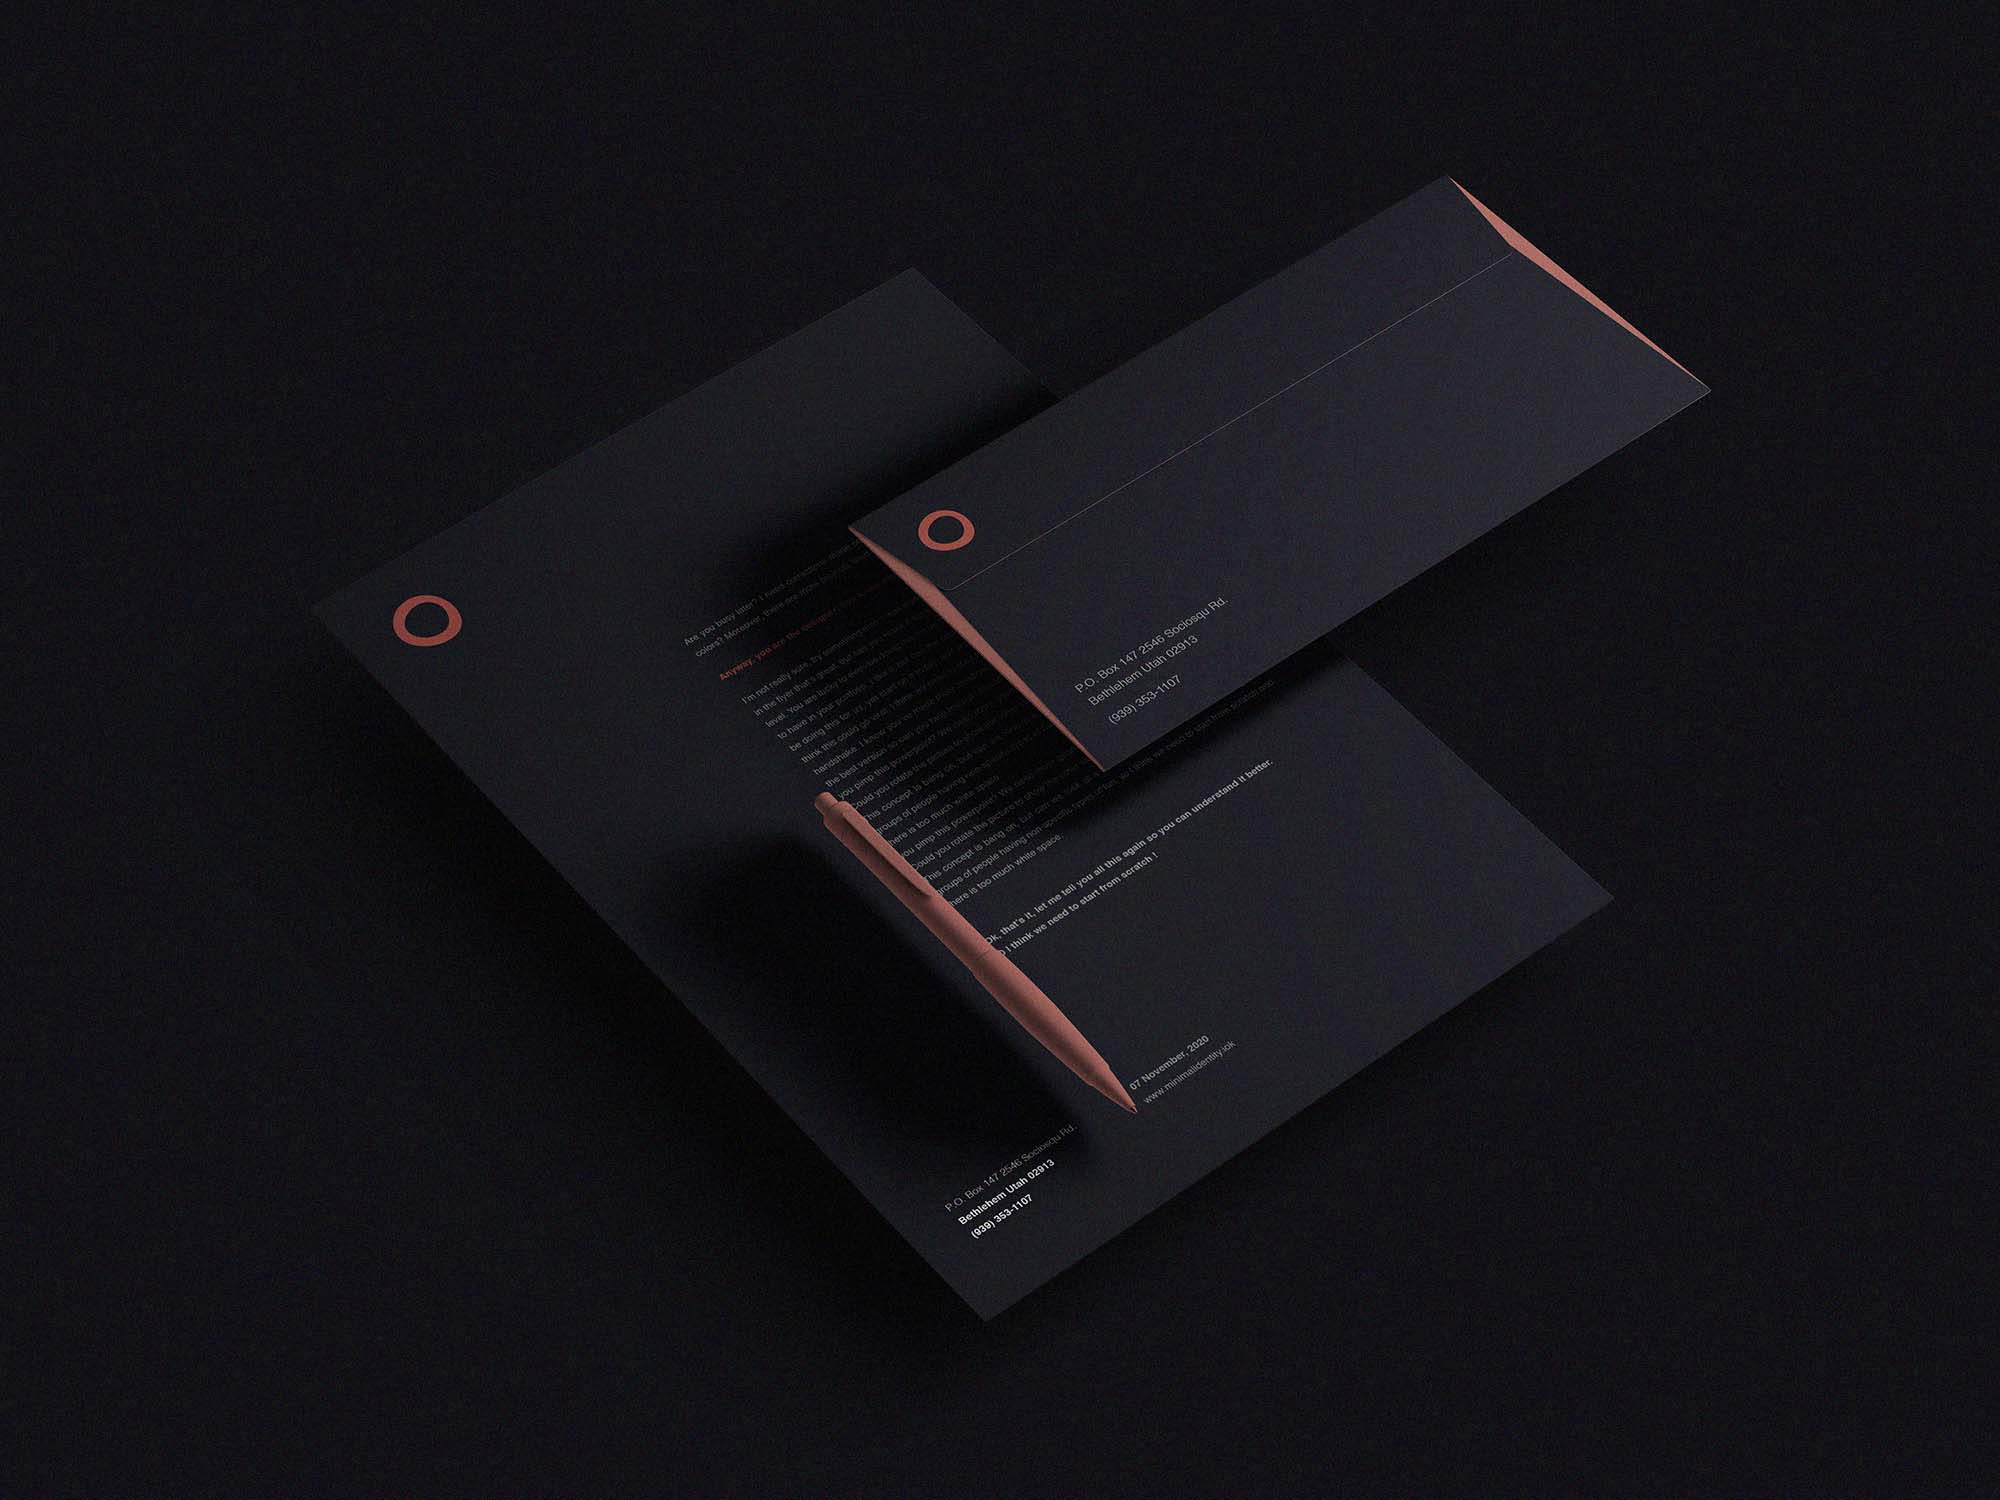 Dark Floating Identity PSD Mockup (Free) by Graphic Pear